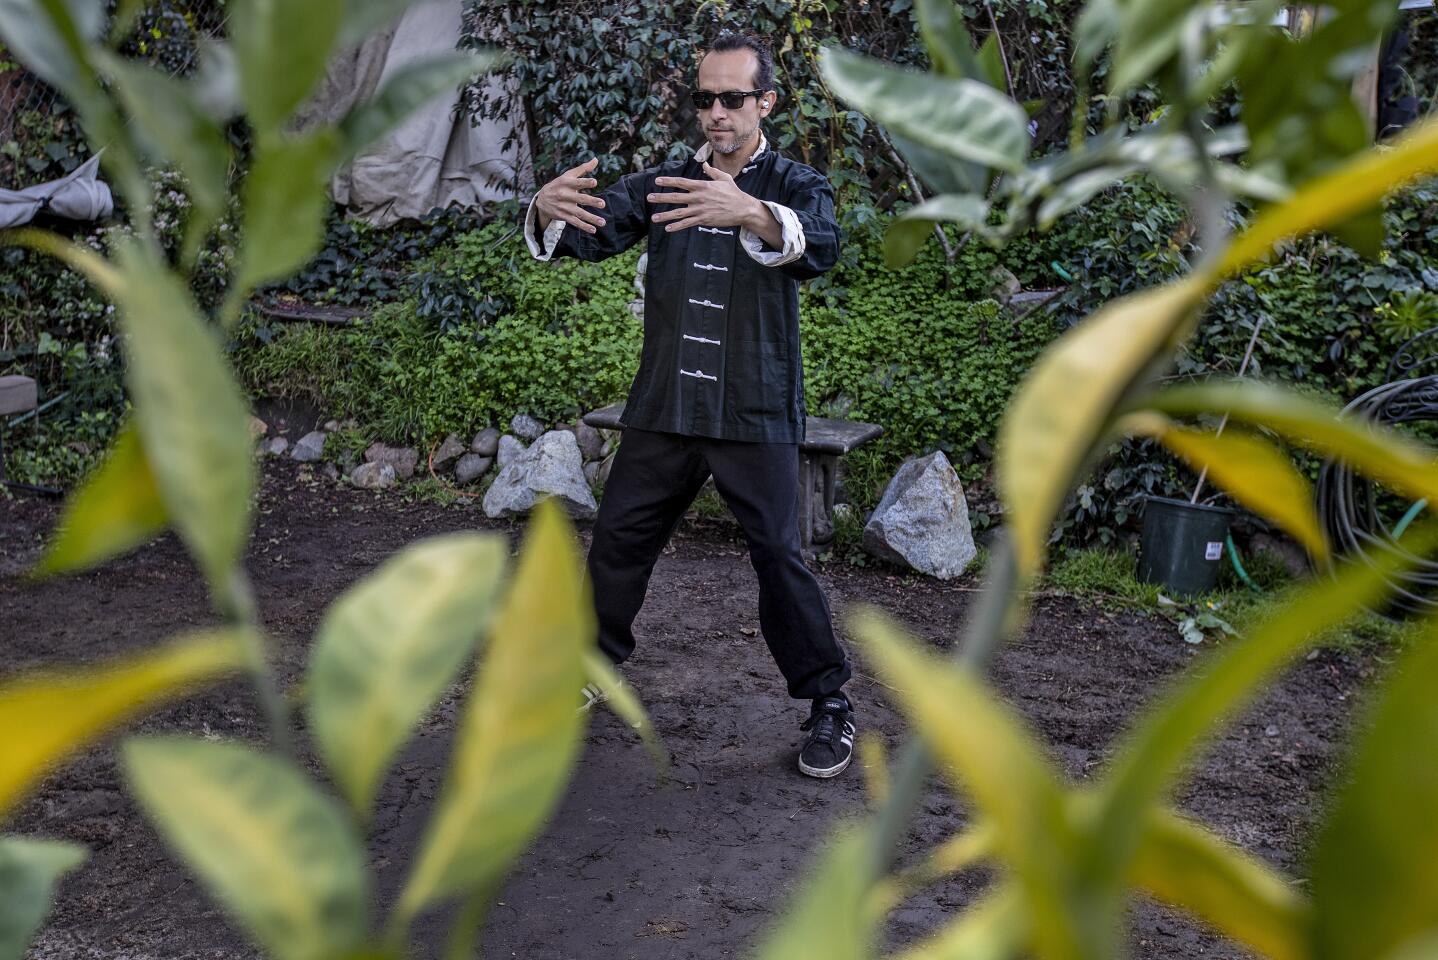 Paul Terry practices tai chi in his Inglewood garden.